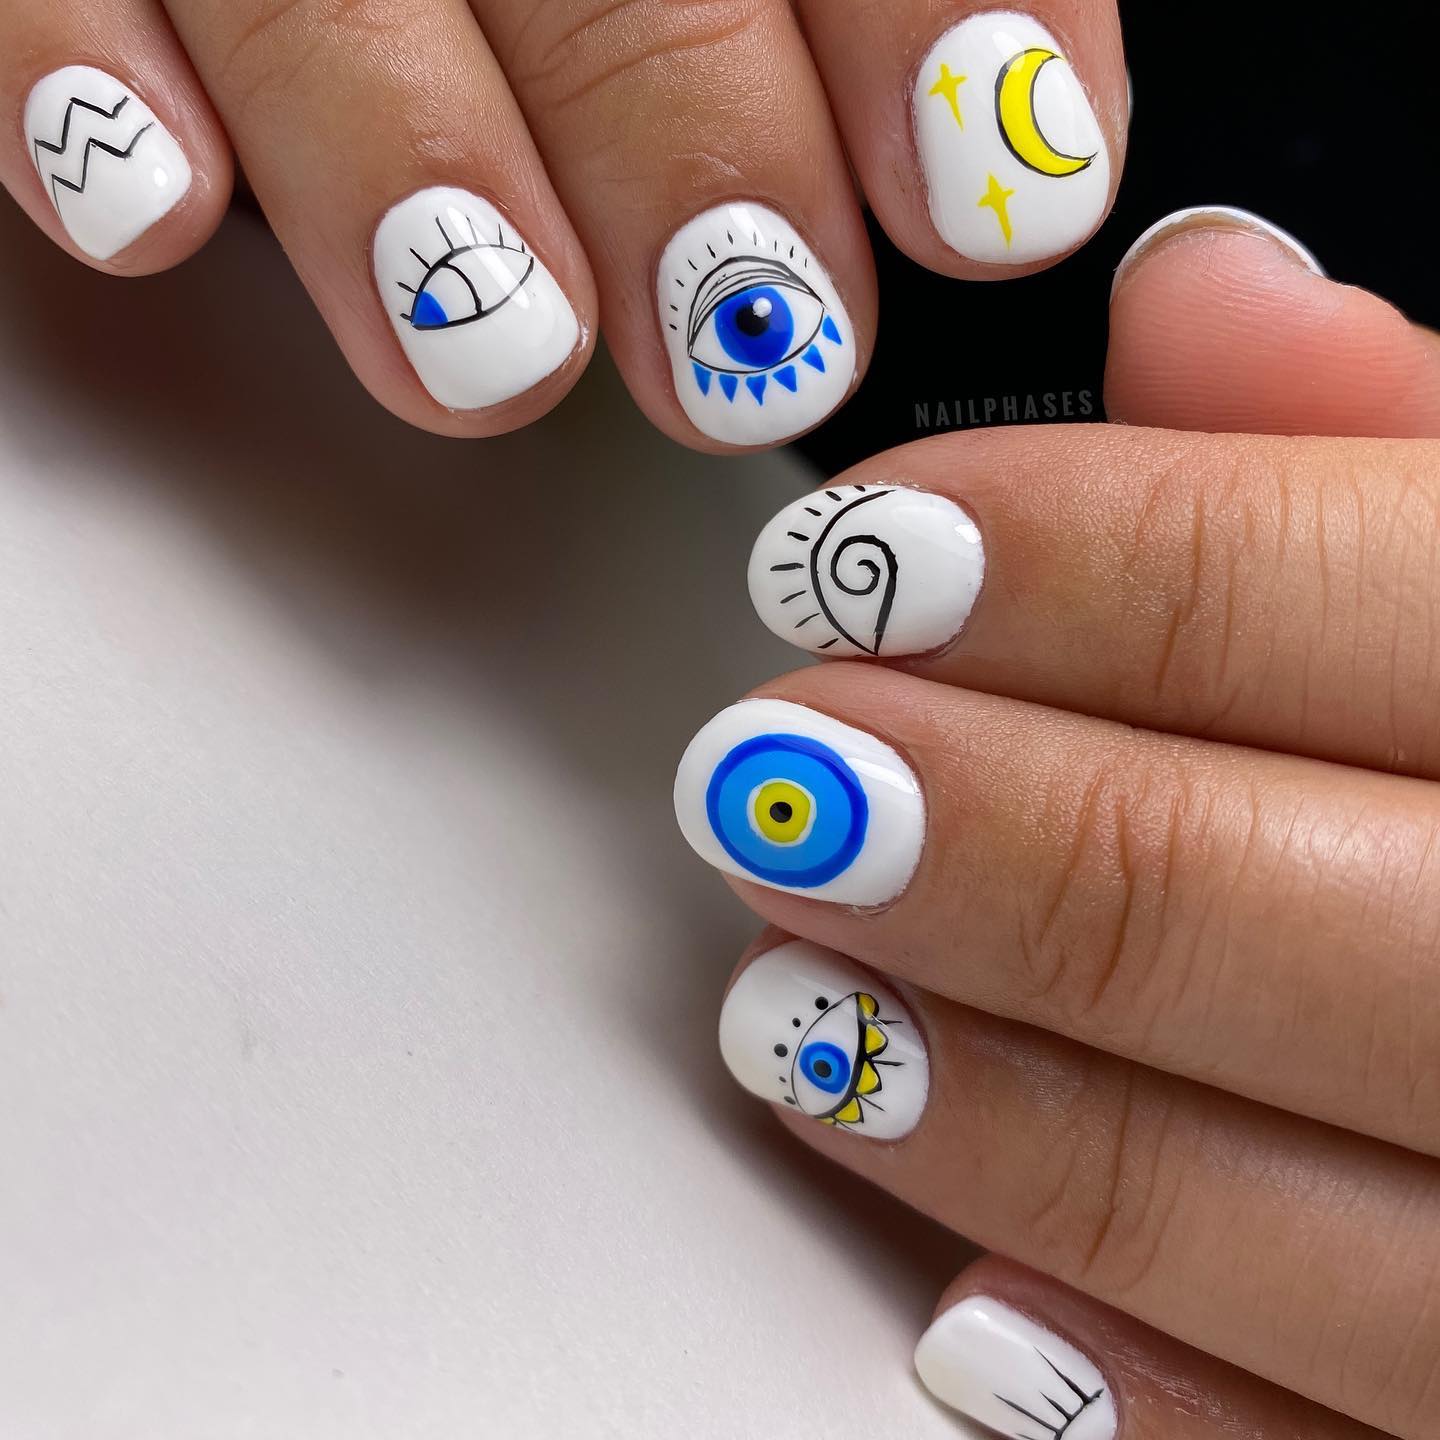 Evil eye nail art is a style of nail art that has been around for a while, but has recently gone viral. This is a traditional symbol that protects the wearer from harm. So, let's decorate your nails to protect yourself!